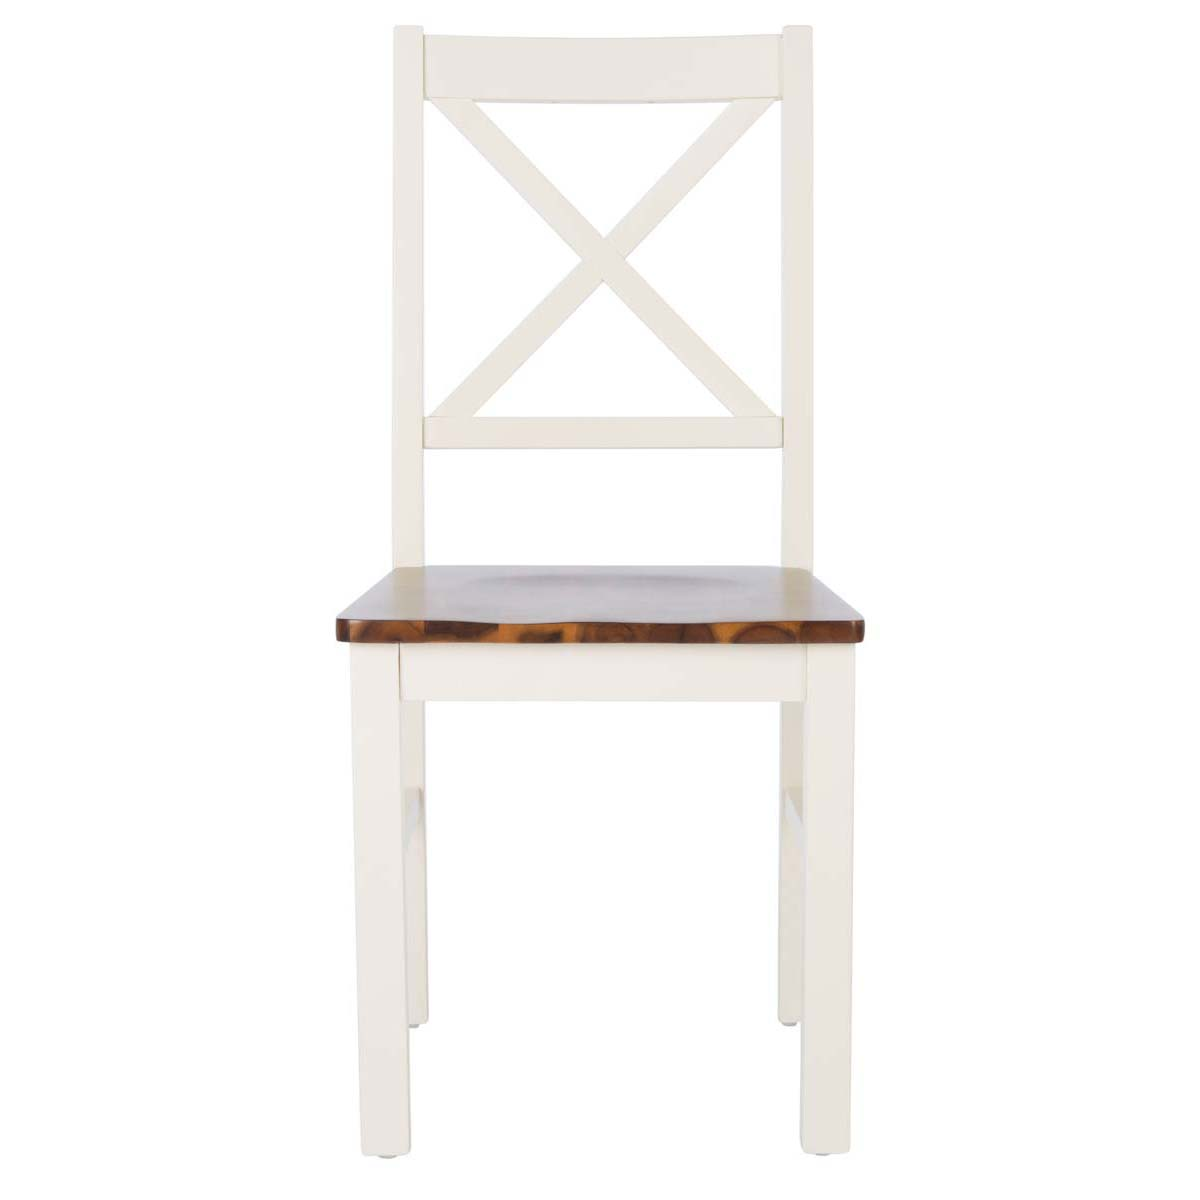 Safavieh Akash Dining Chair, DCH9210 - White/Natural (Set of 2)